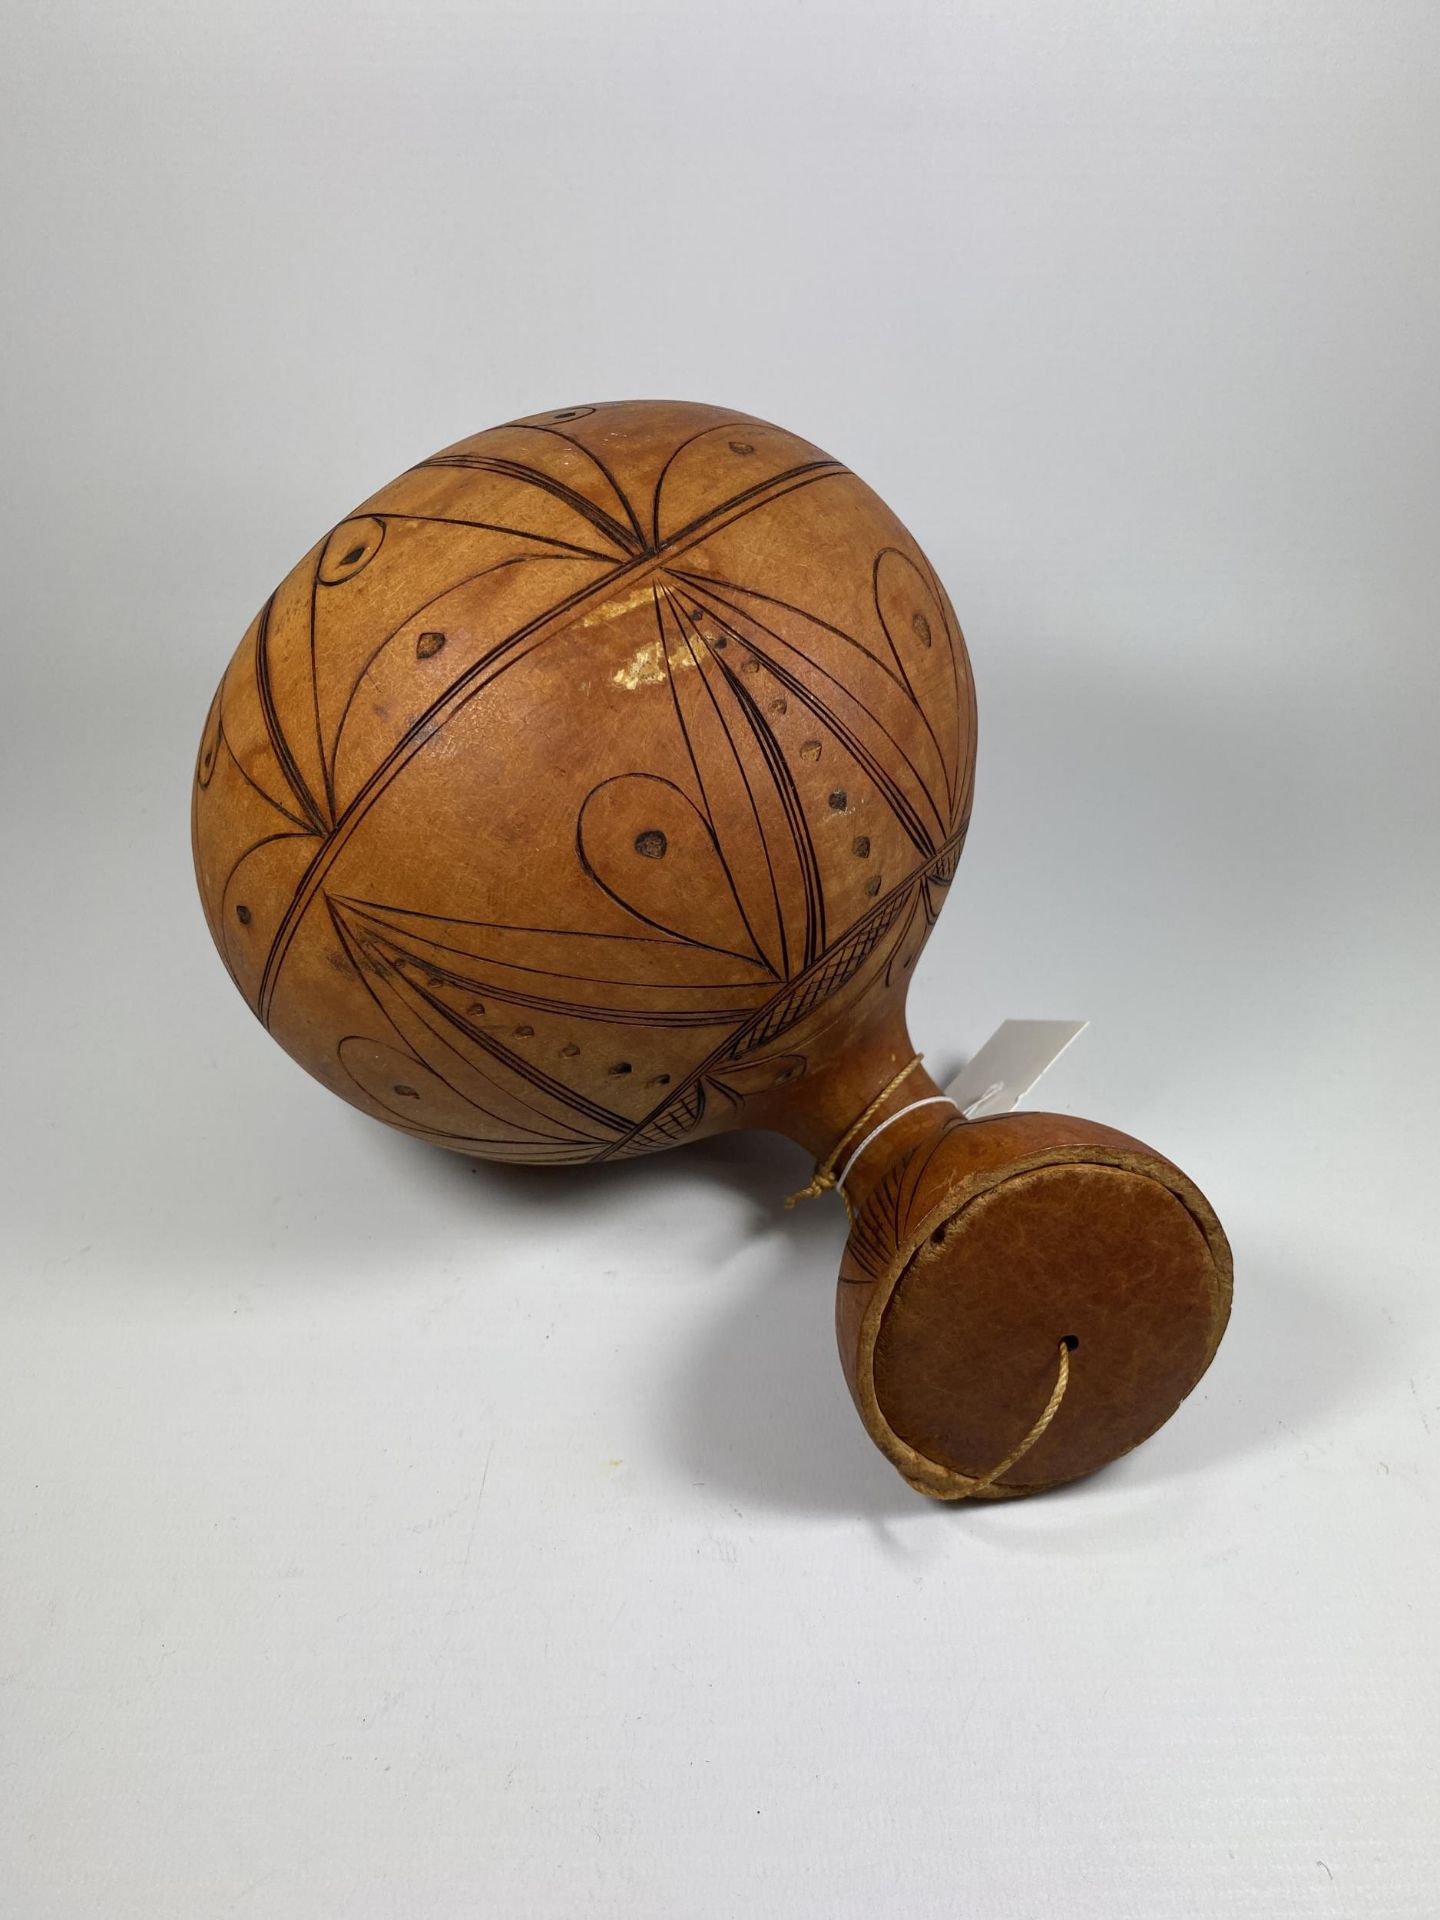 A VINTAGE TRIBAL WOODEN POPPY SEED GOURD